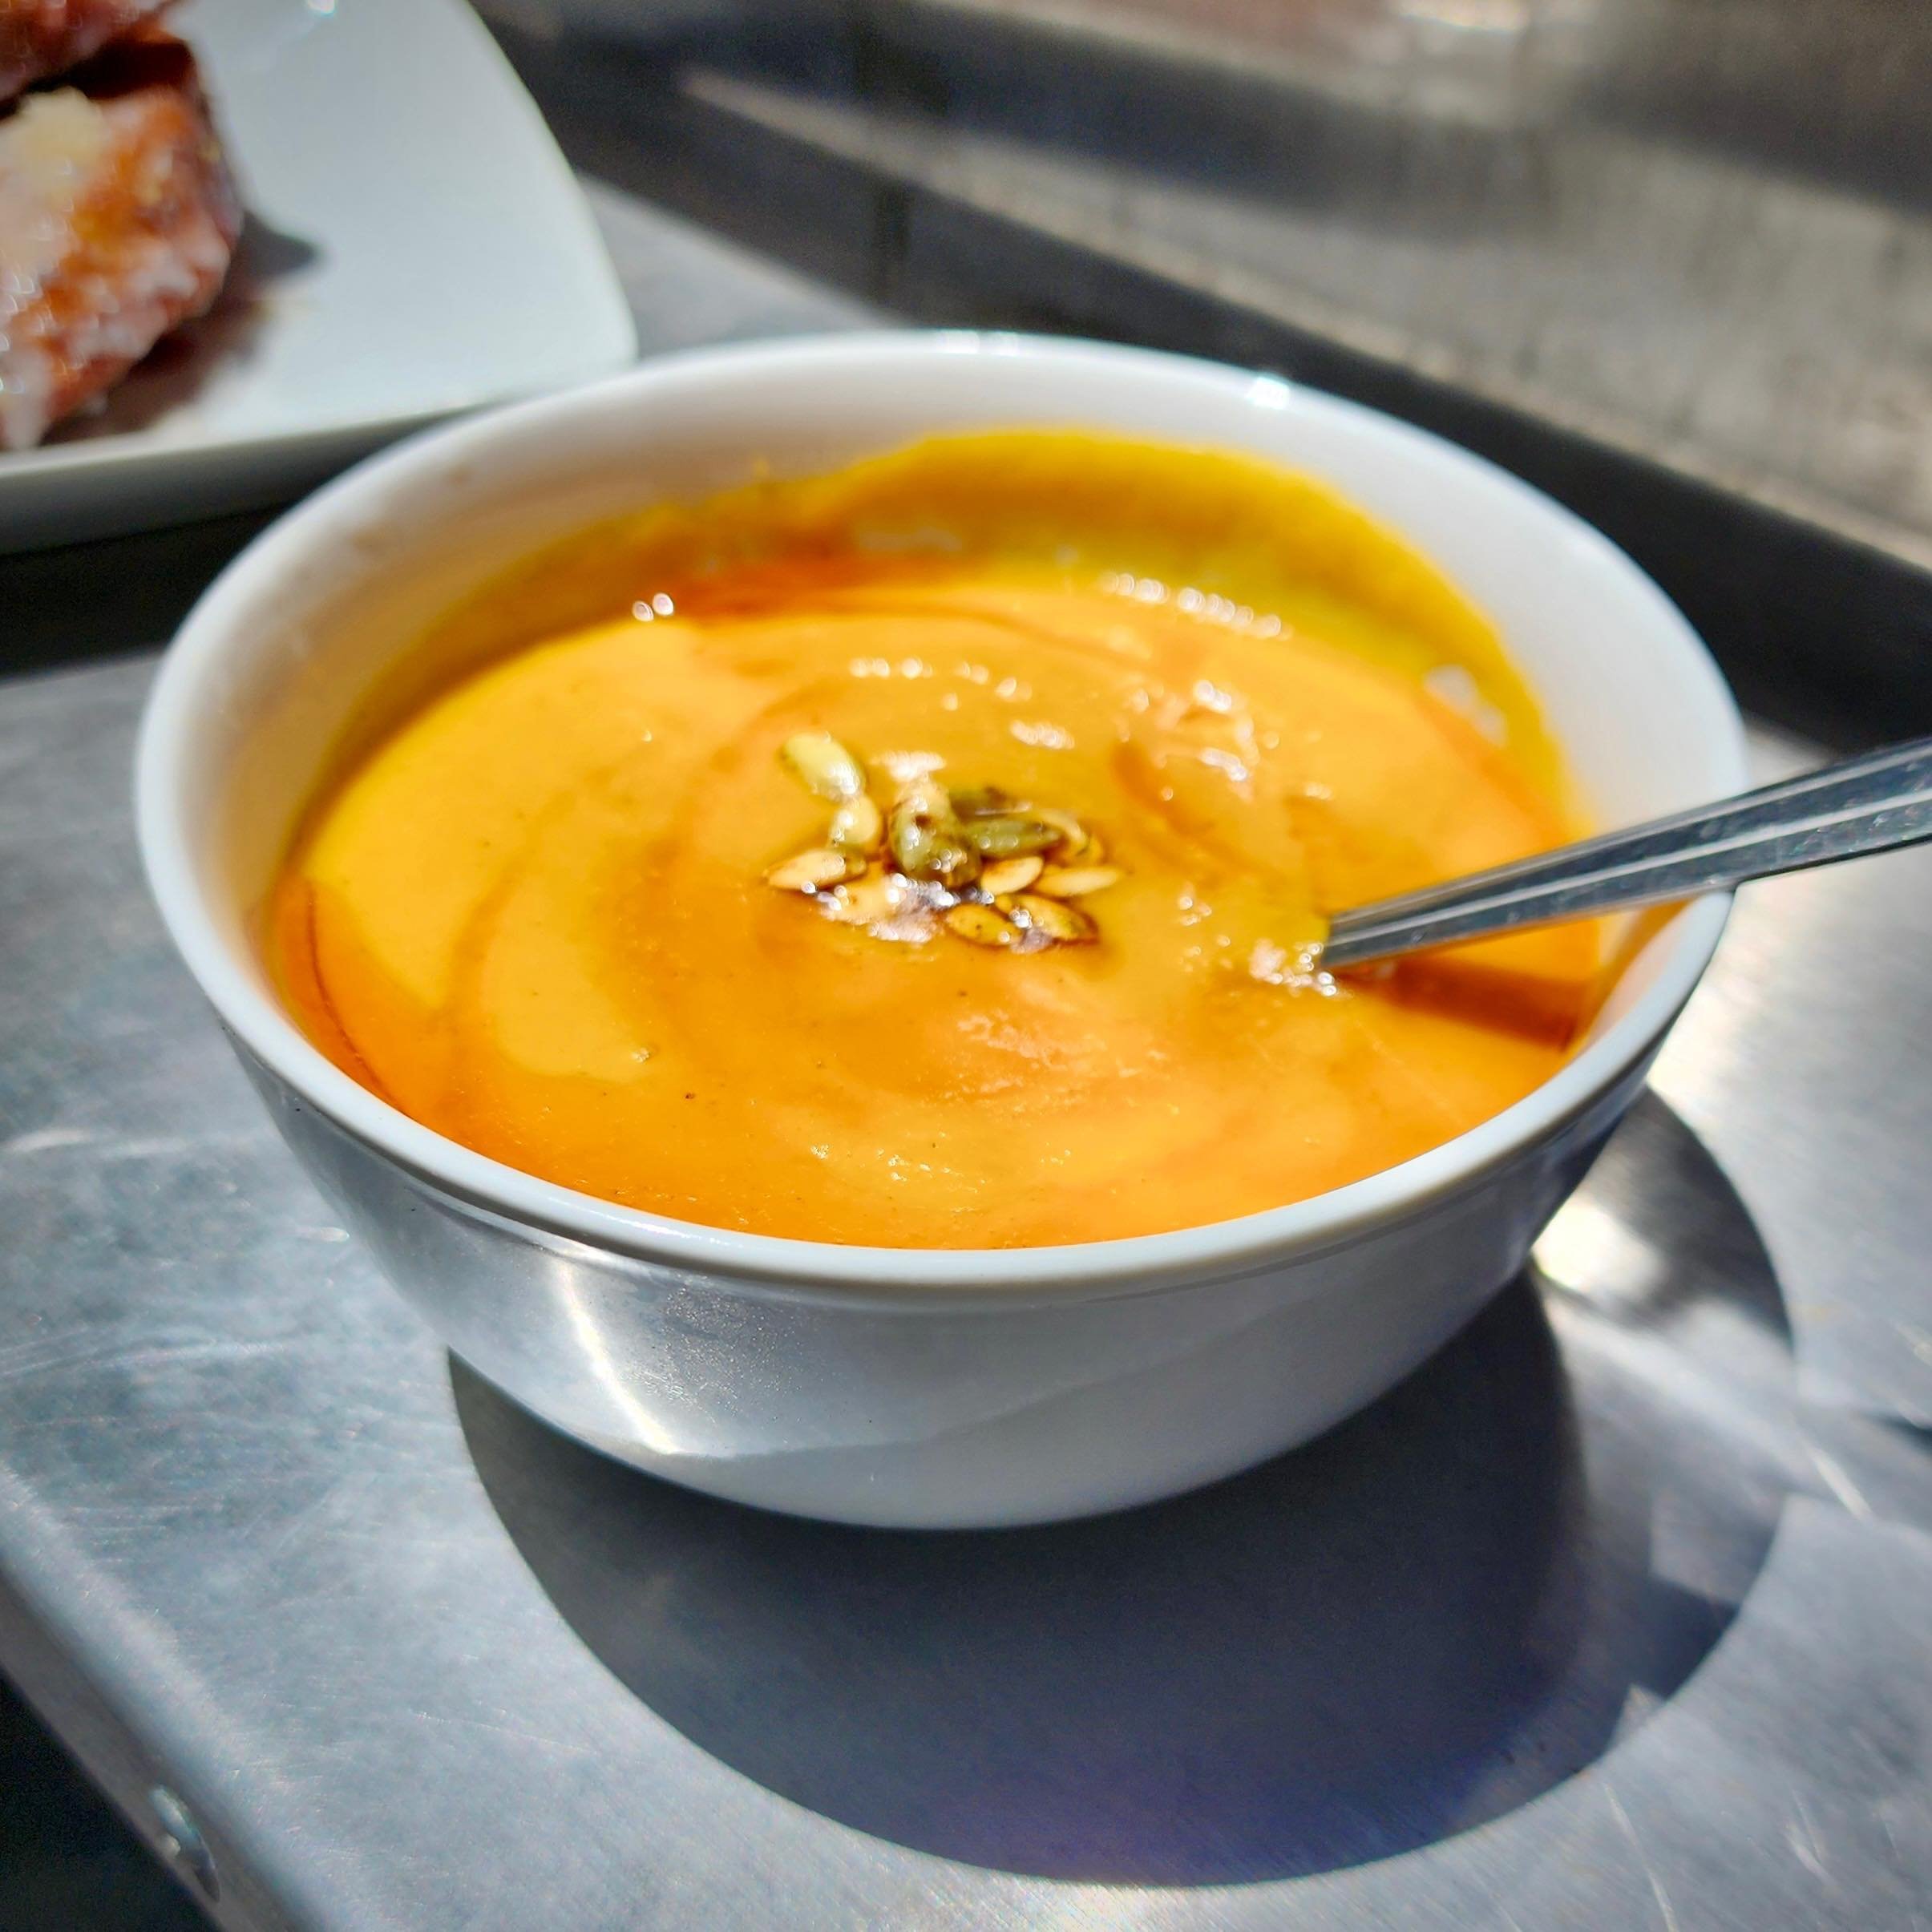 ✨Spicy Sweet Potato Soup✨
Sweet potato, garlic and onion blended until smooth and creamy, then finished with chili oil for a touch of  heat, and topped with toasted pepitas. Our Spicy Sweet Potato Soup is the soup of the week! Velvety and smooth this